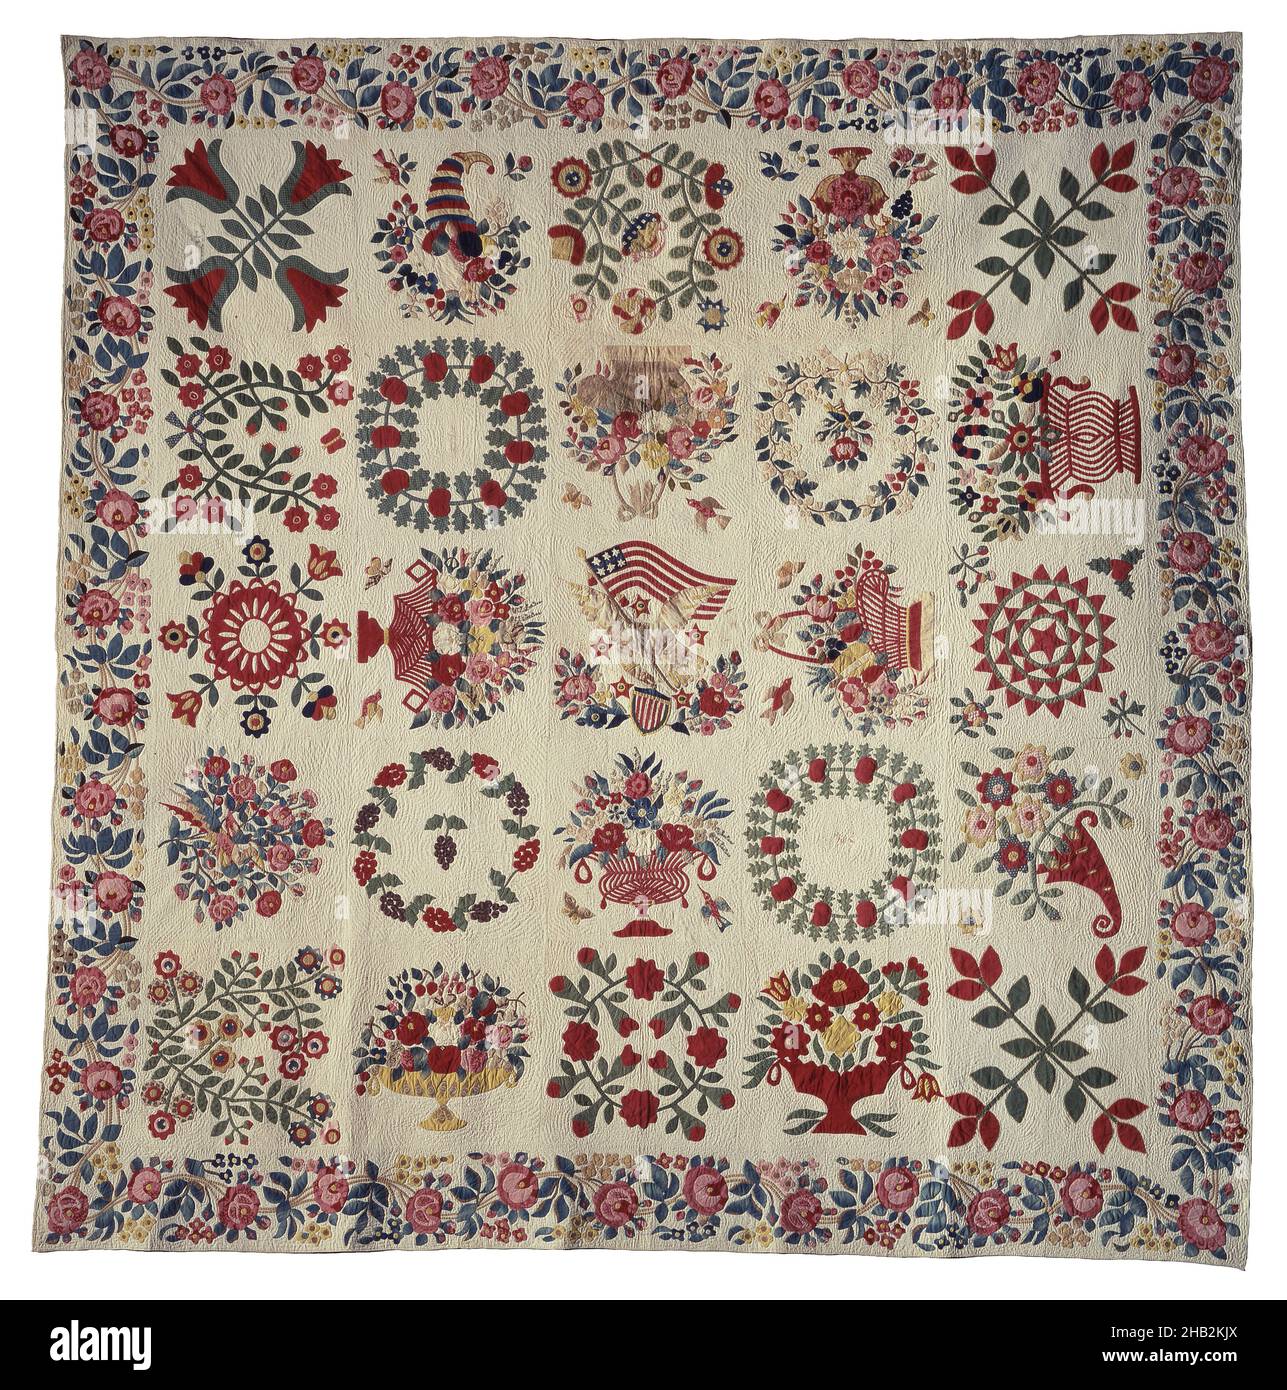 Album Quilt, American, 1848, Cotton, Made in Baltimore, Maryland, United States, North and Central America, Coverings & hangings, textiles, 100 1/4 x 100 1/4 in. (254.6 x 254.6 cm Stock Photo